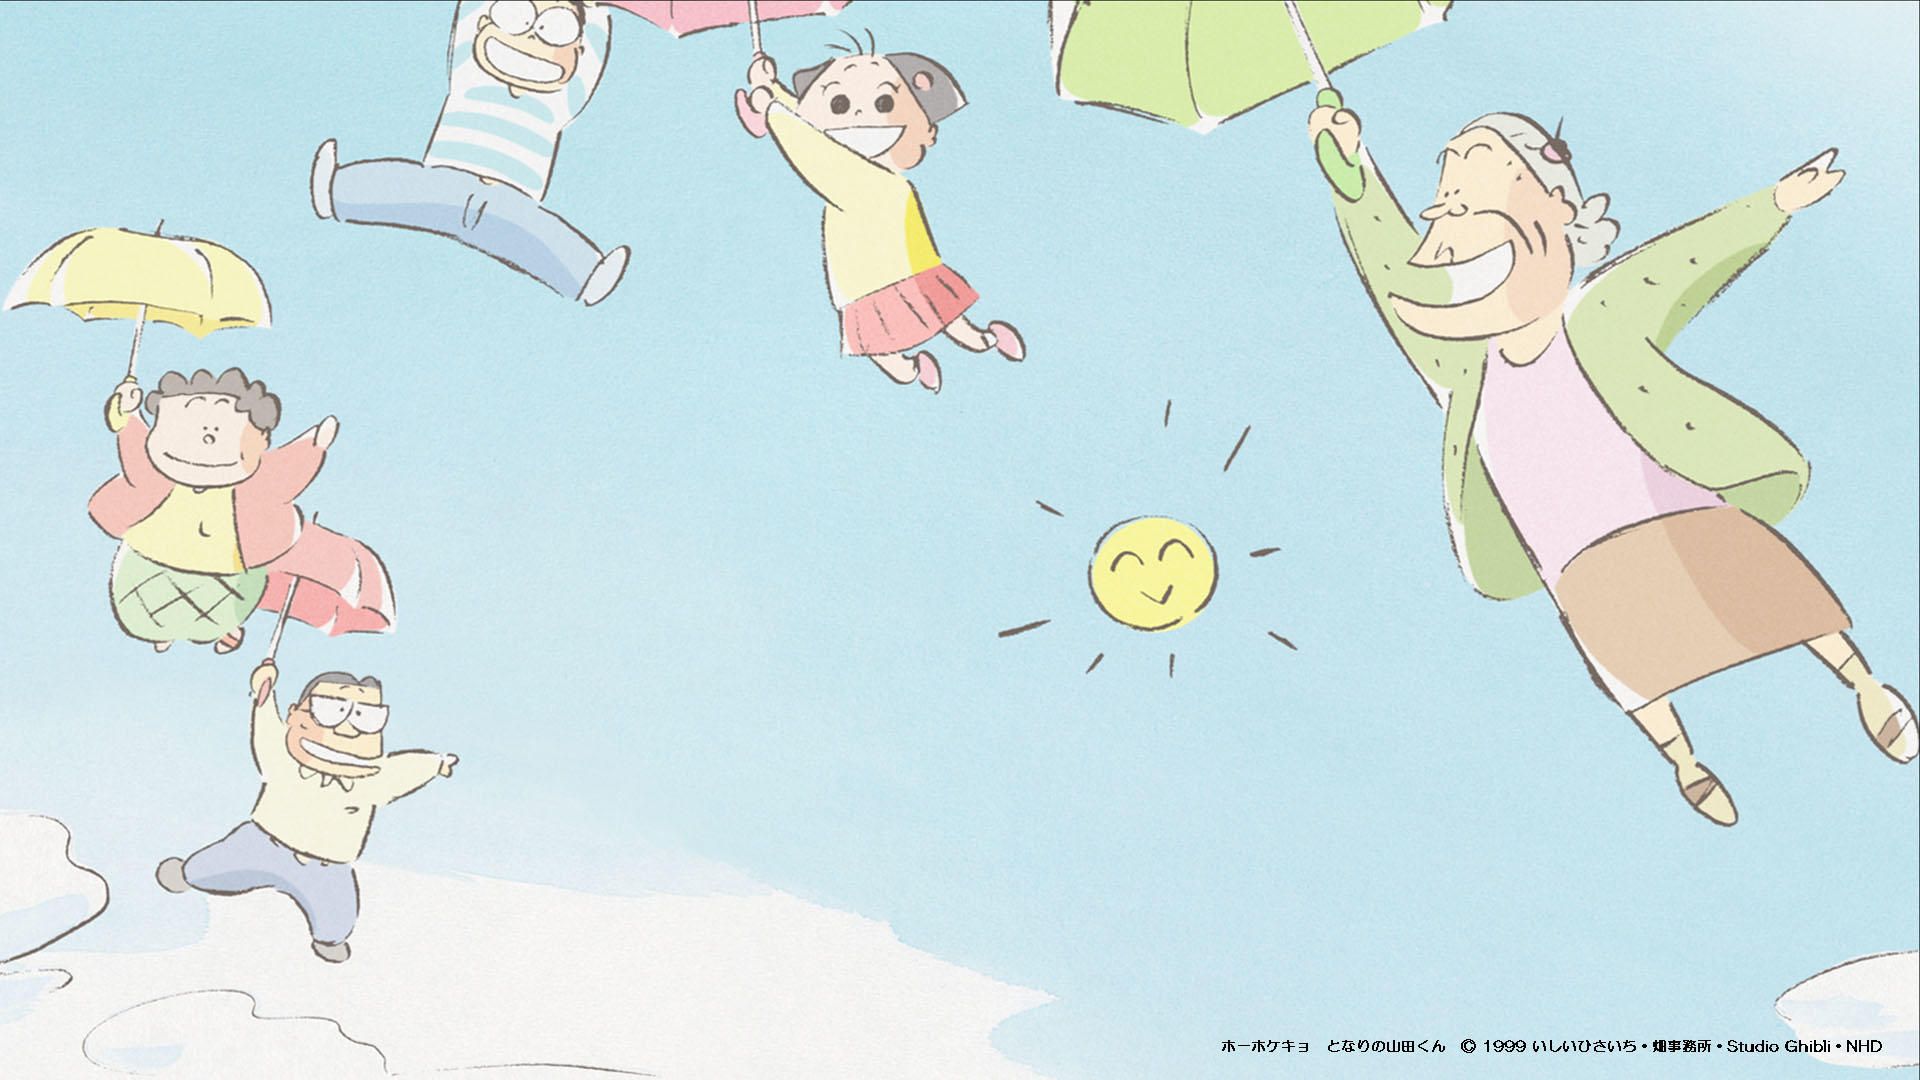 Download free Studio Ghibli wallpaper for your video chats and meetings